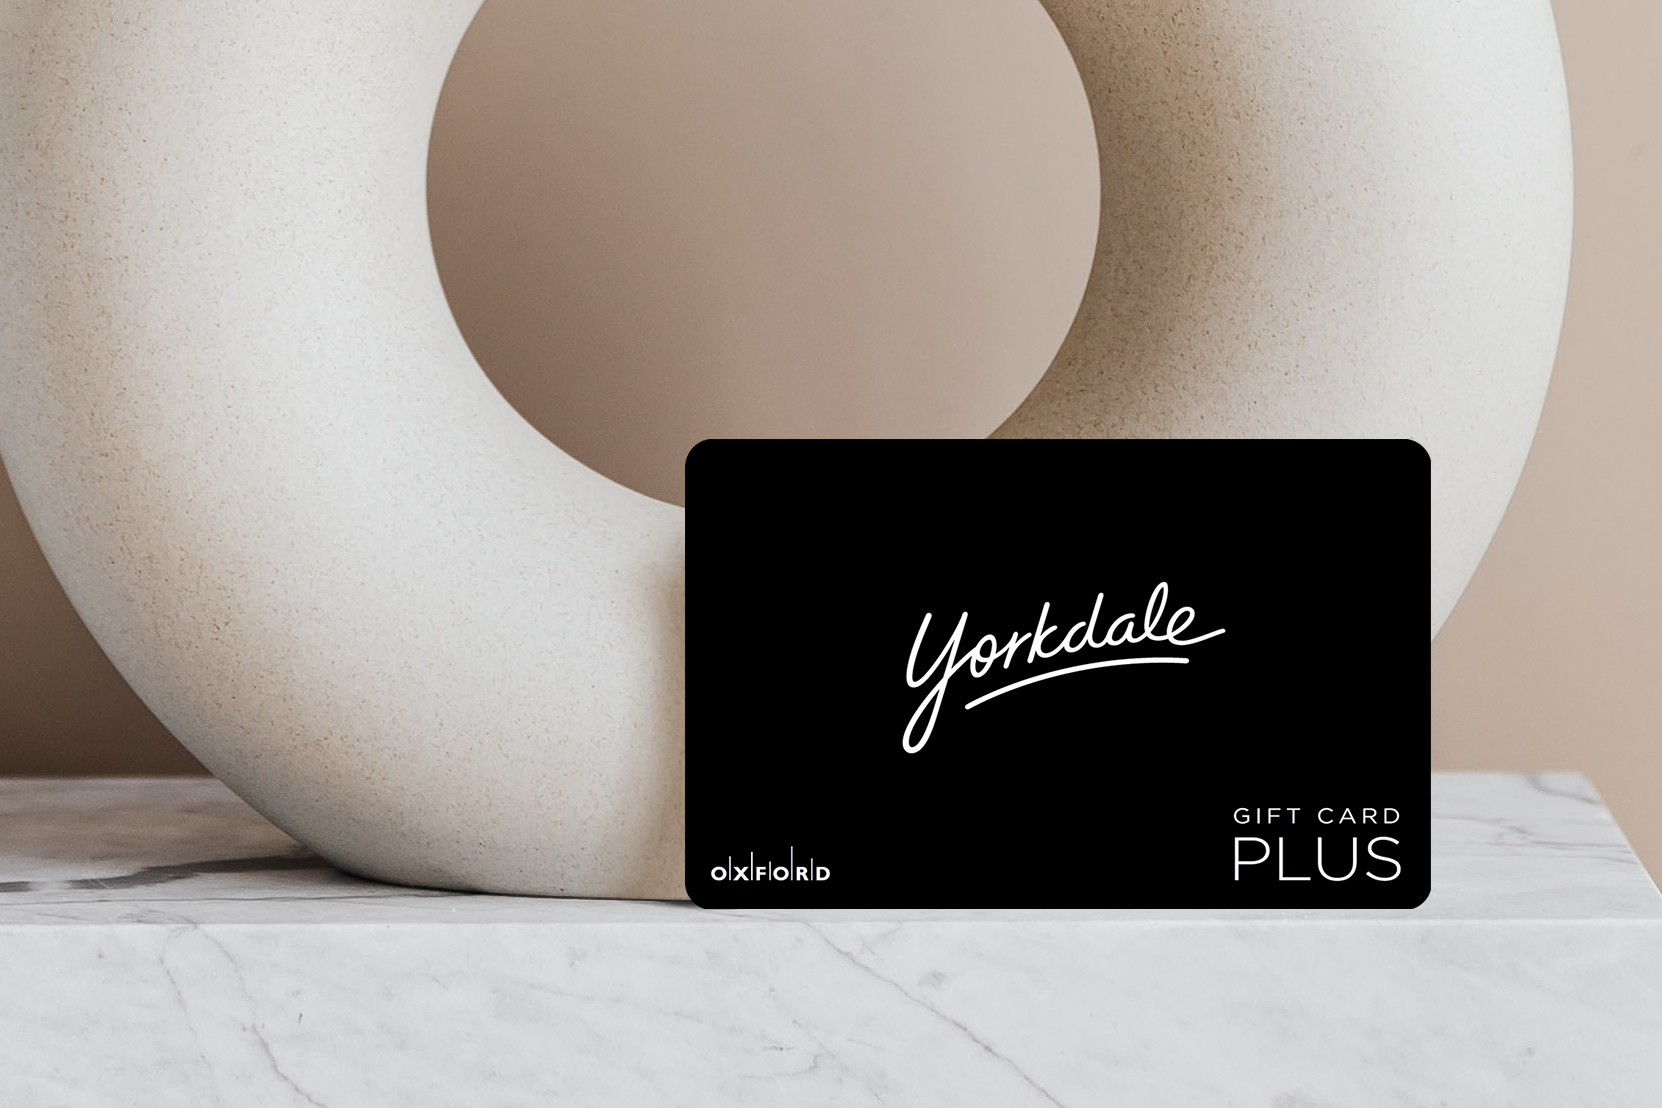 promotional image of a black yorkdale gift card in front of an oval ceramic vase